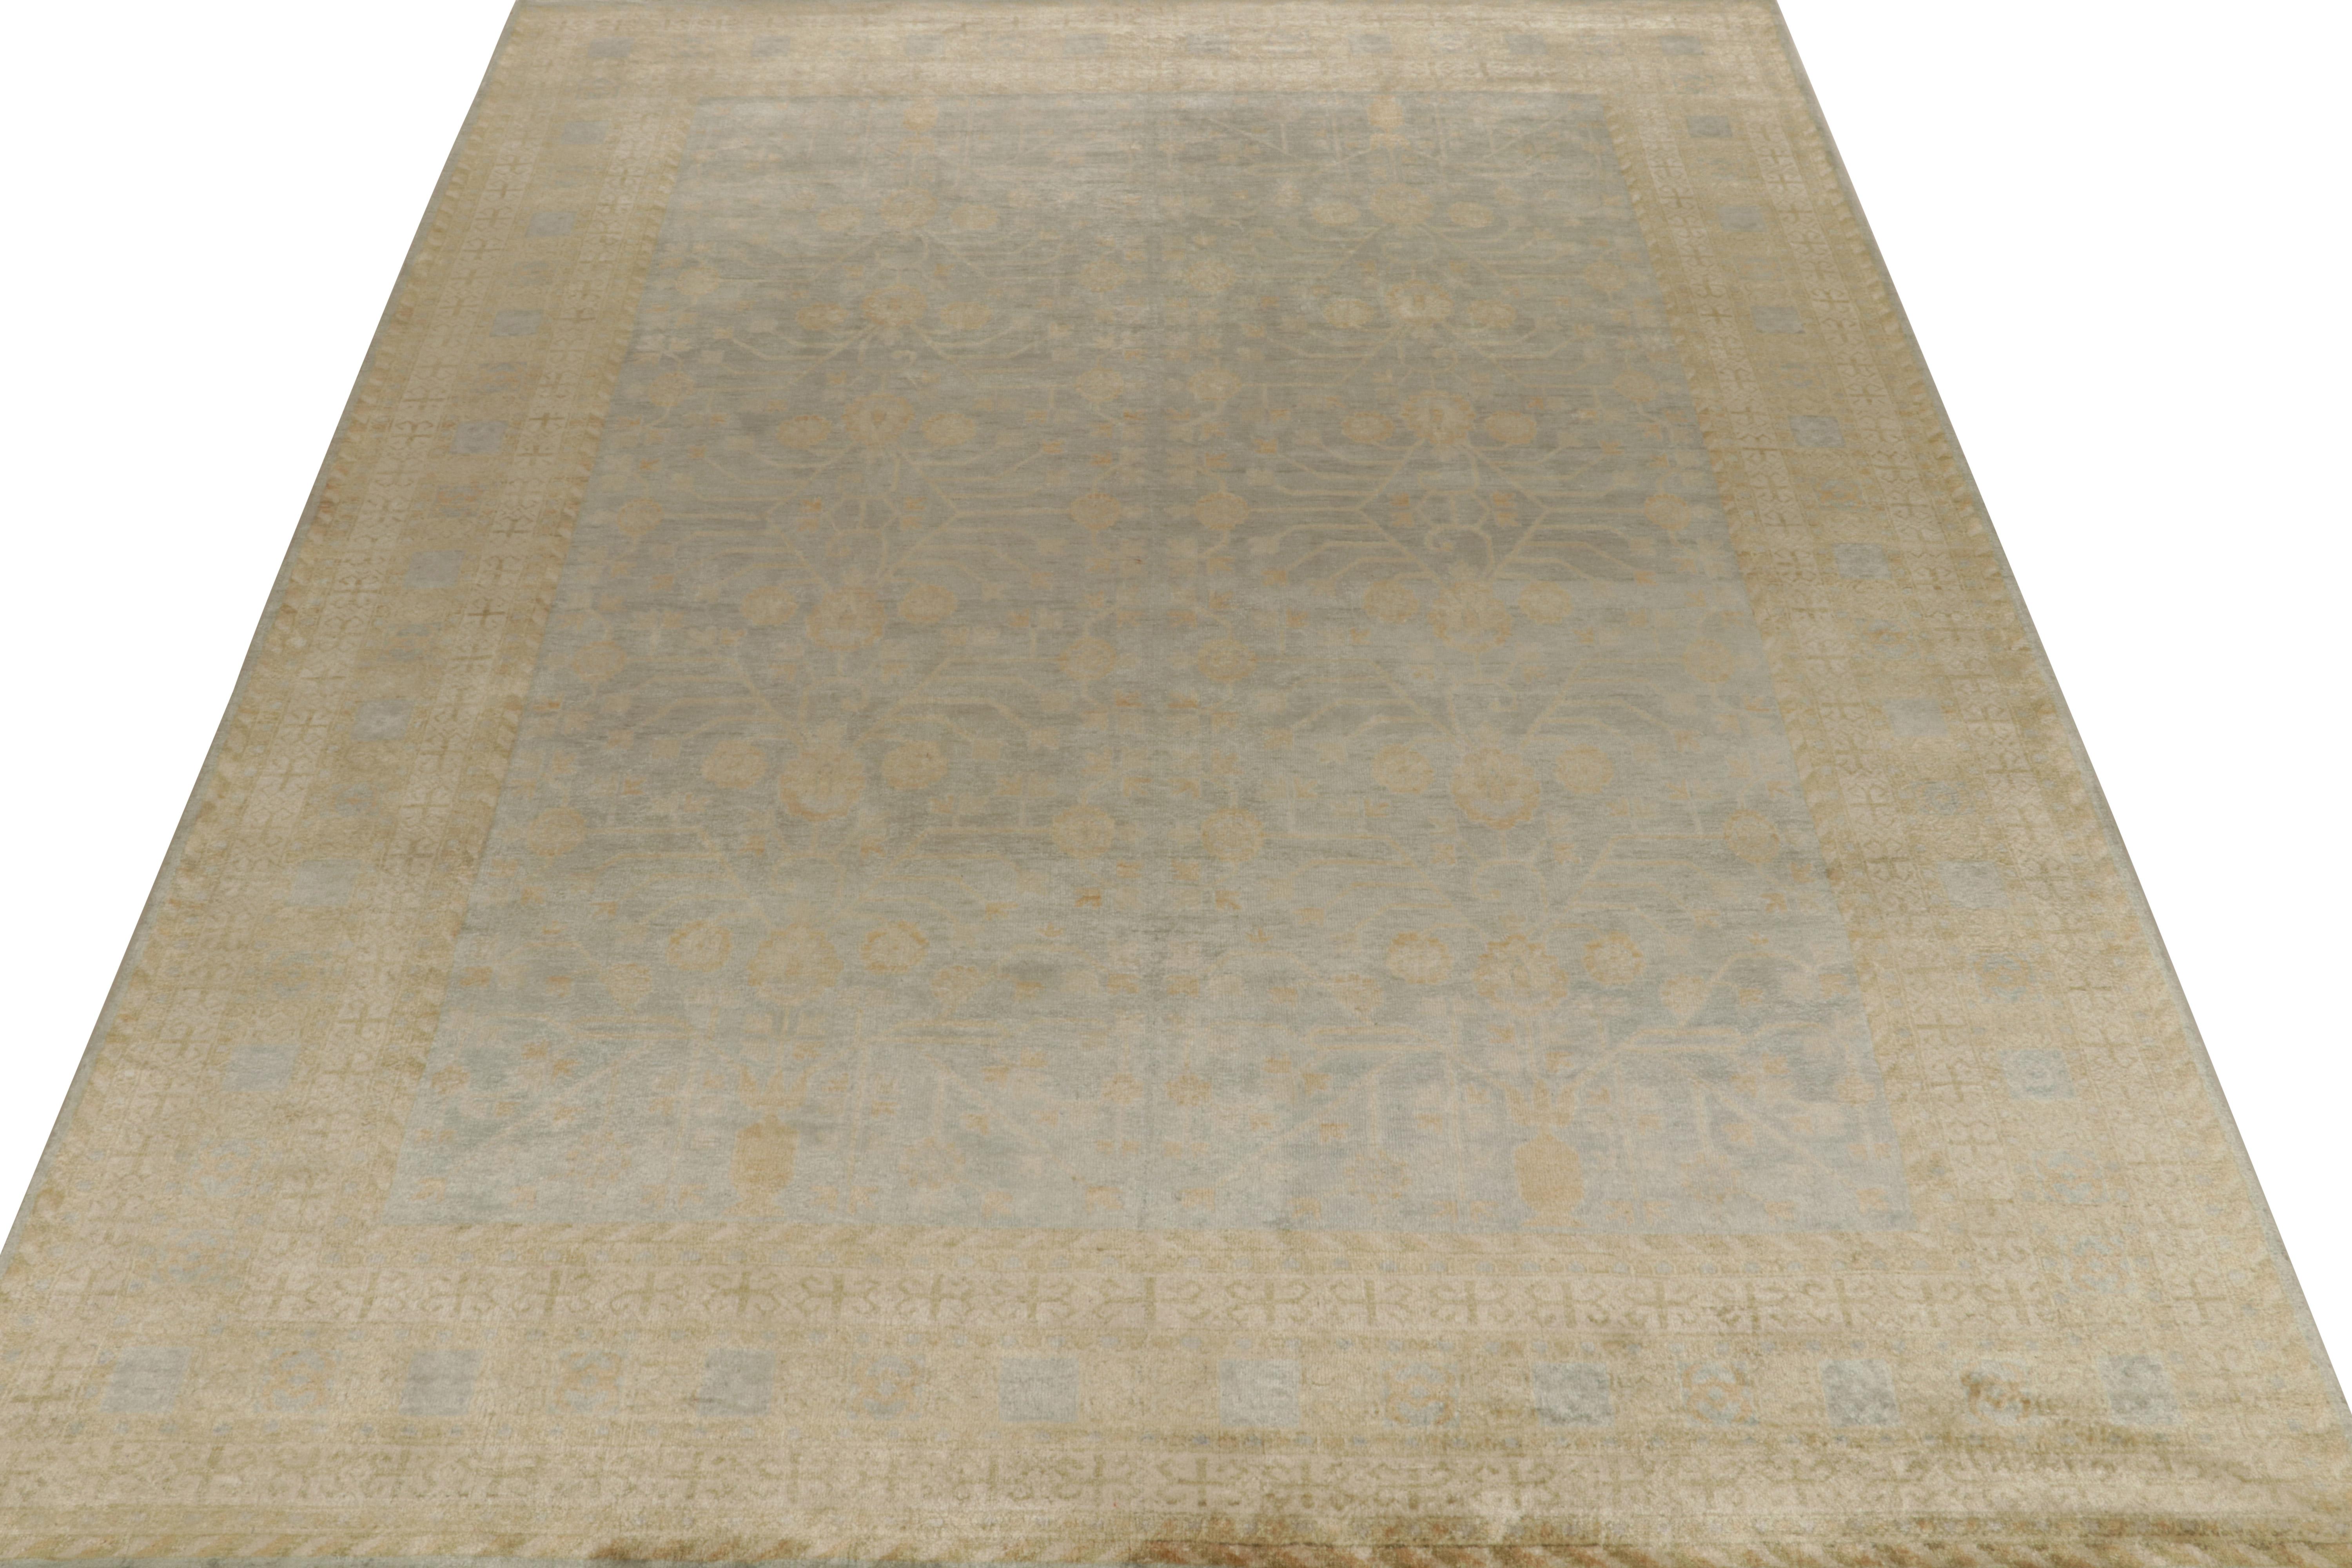 Indian Rug & Kilim’s Khotan Style Rug in Blue with Beige, Gold Pomegranate Patterns For Sale